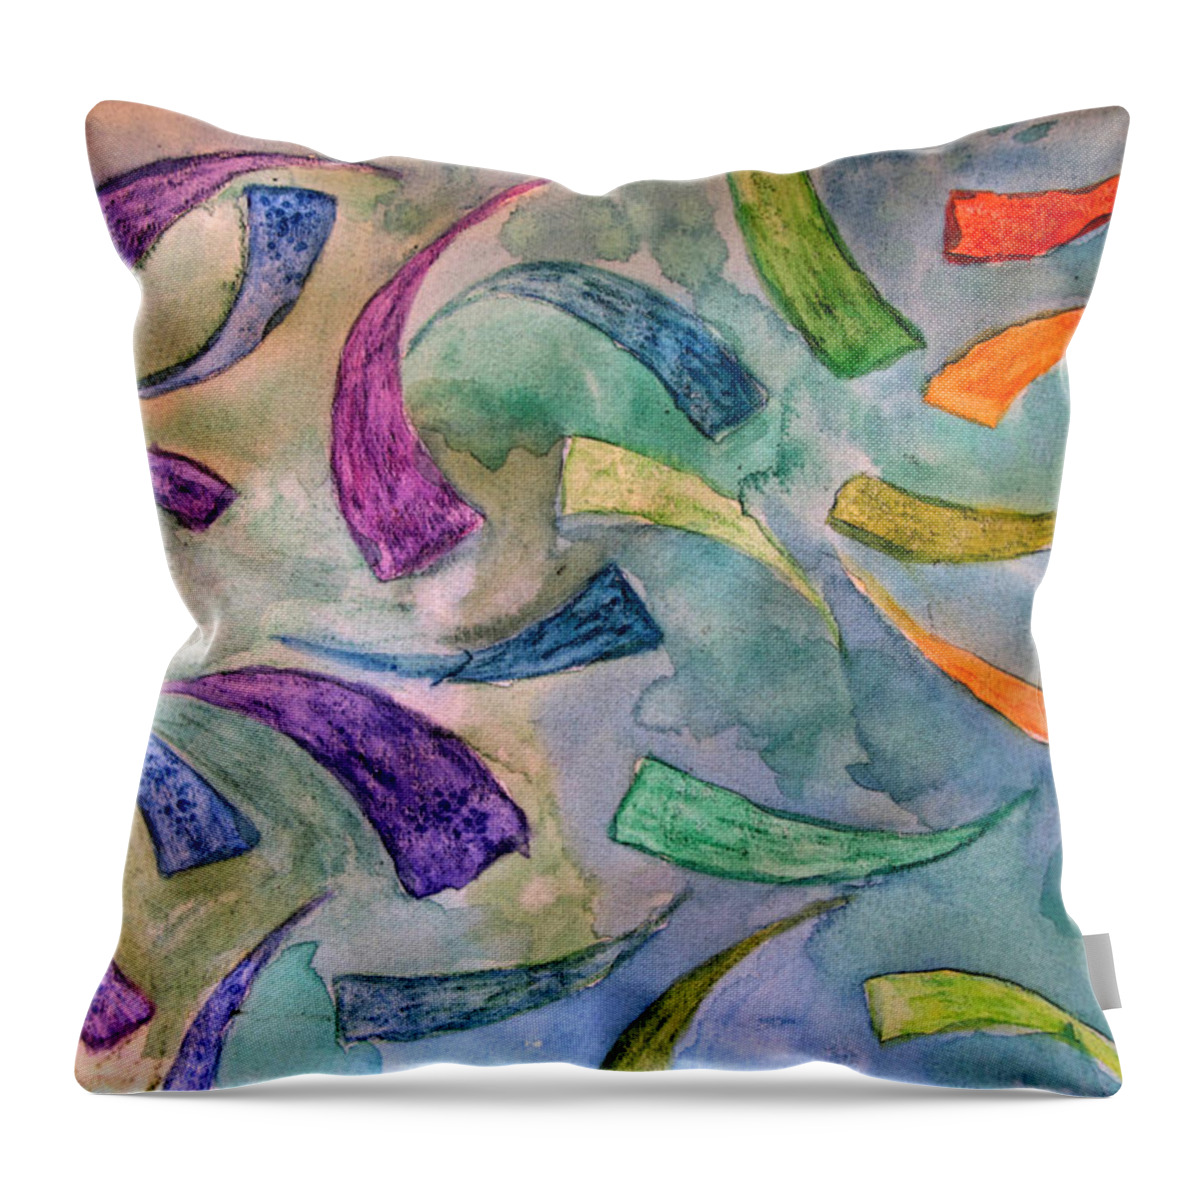 Abstract Throw Pillow featuring the painting Rainbow Fish by Debbie Portwood